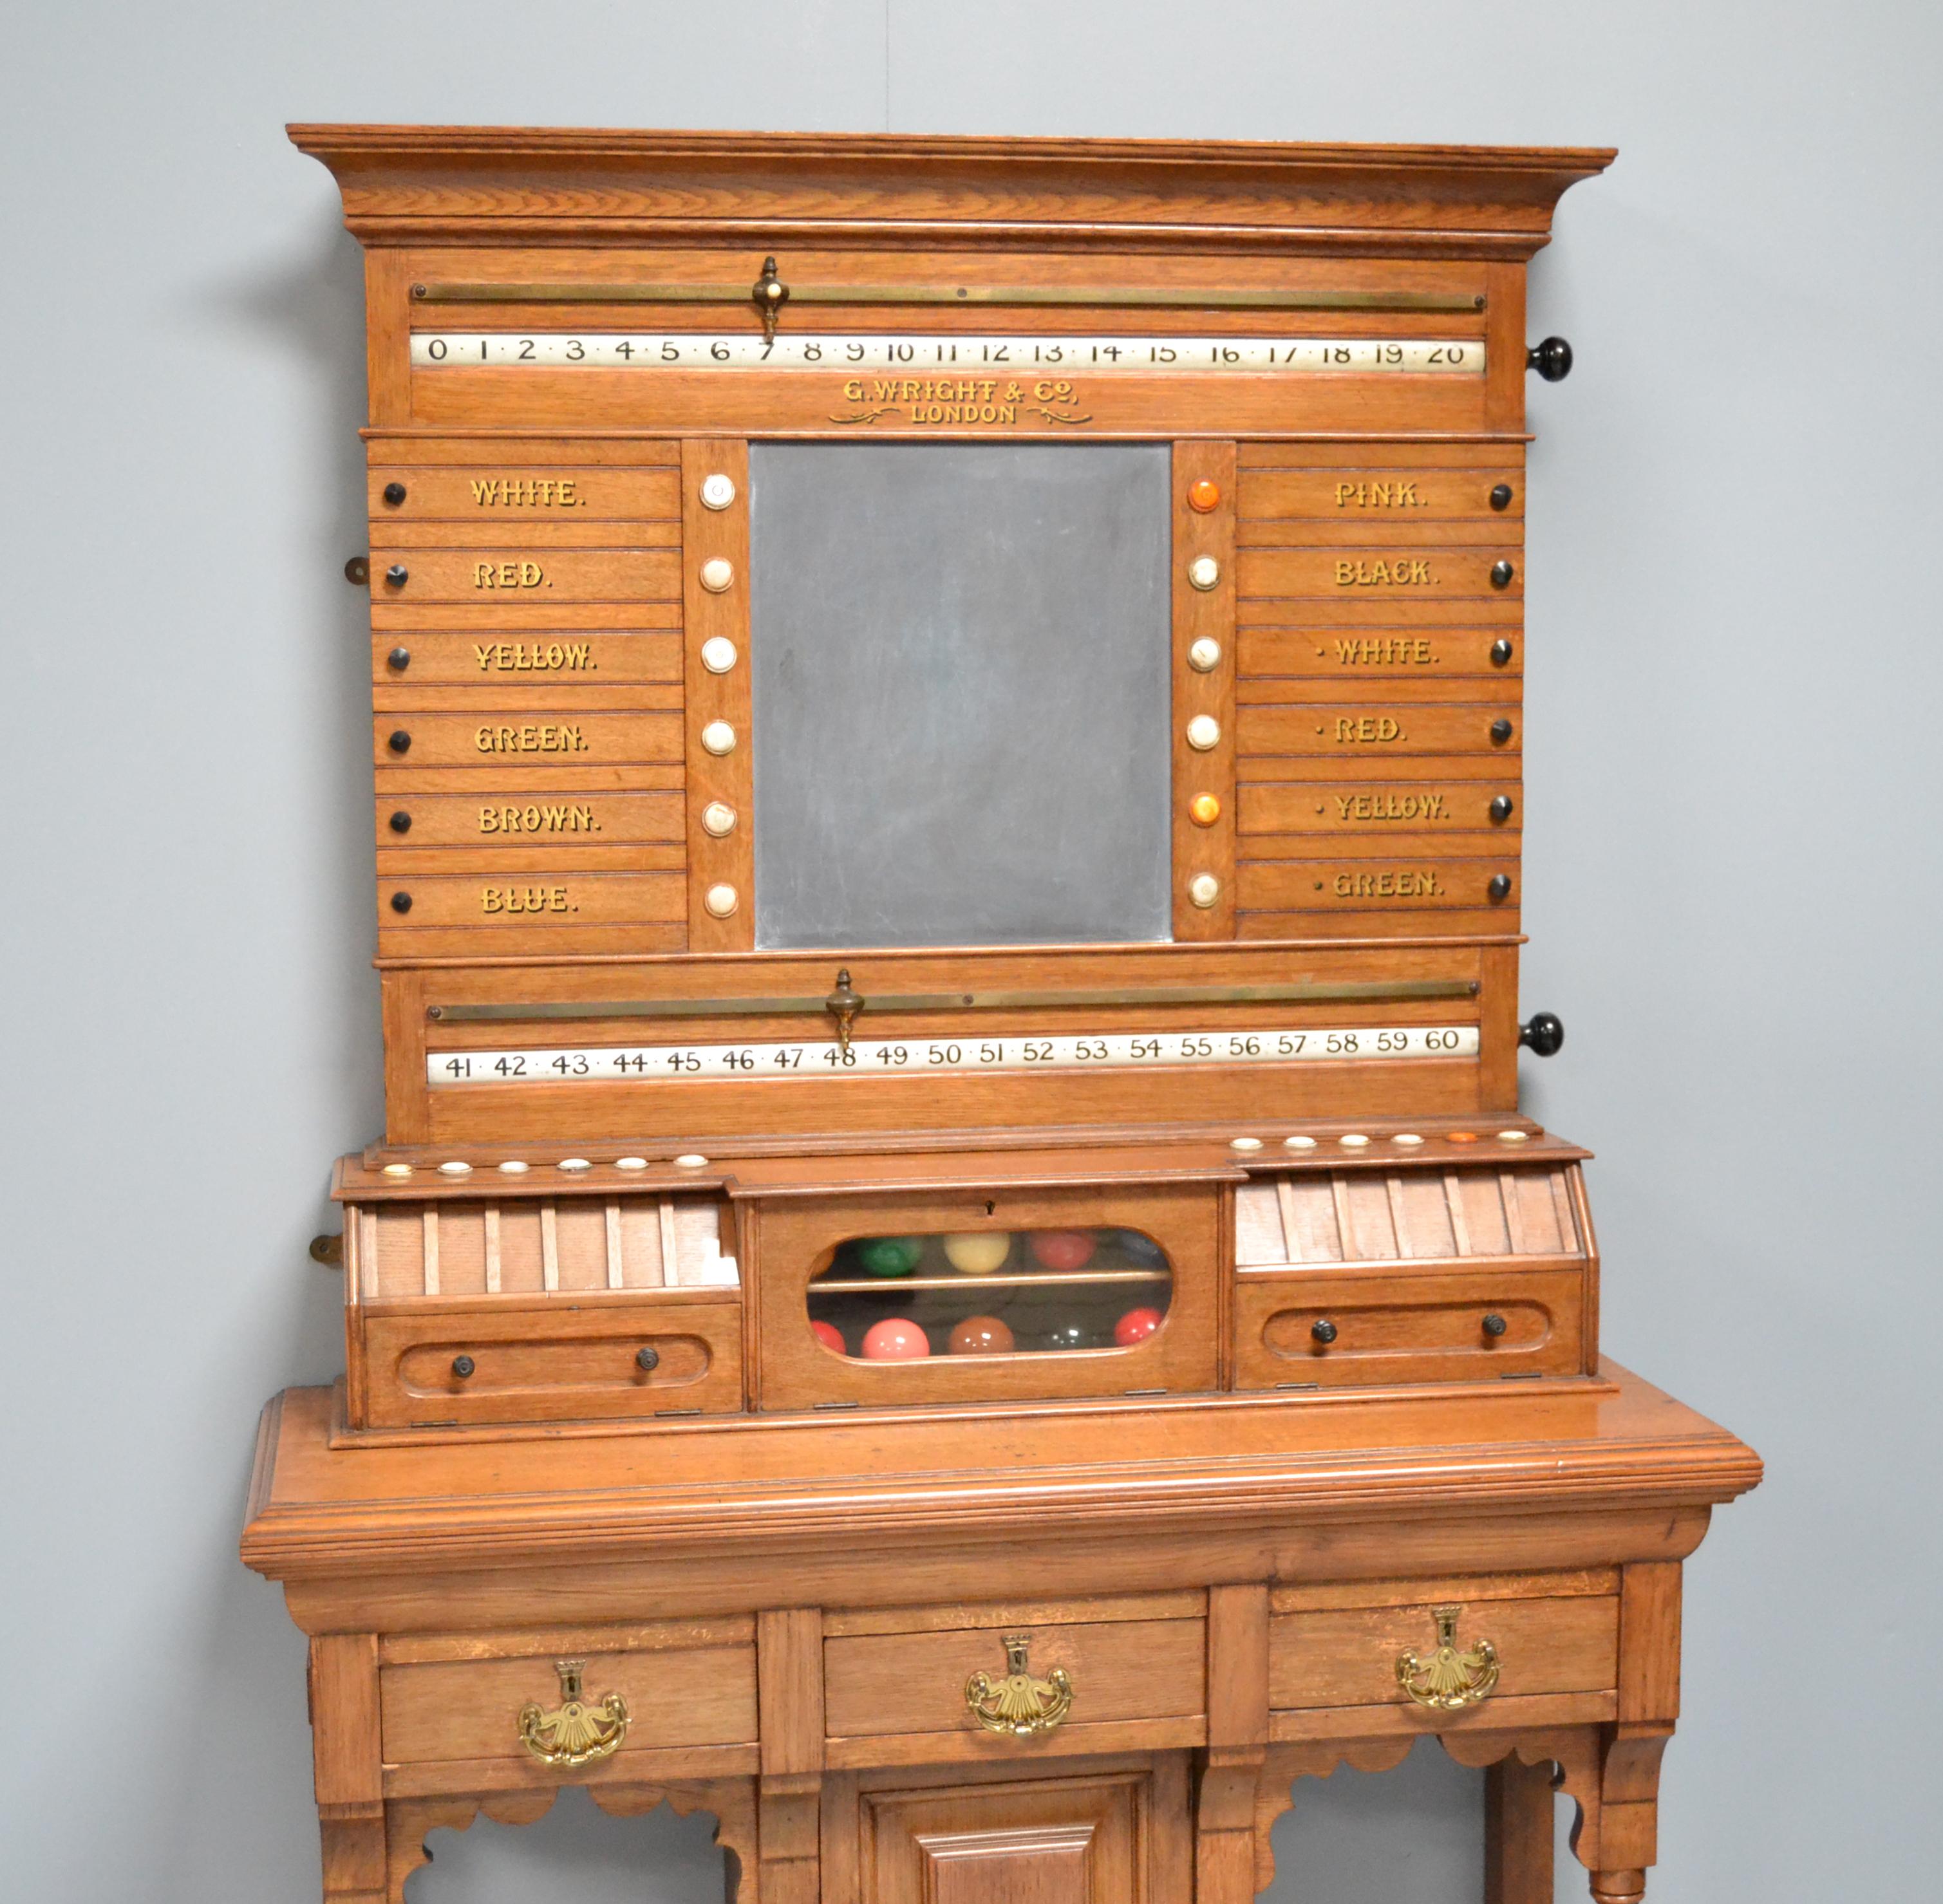 A solid oak free standing scoring cabinet by George Wright of London, circa 1890.

A country house cabinet to score billiards, snooker and life POOL, central slate panel flanked by revolving number bars and lettered life POOL panels with inlaid